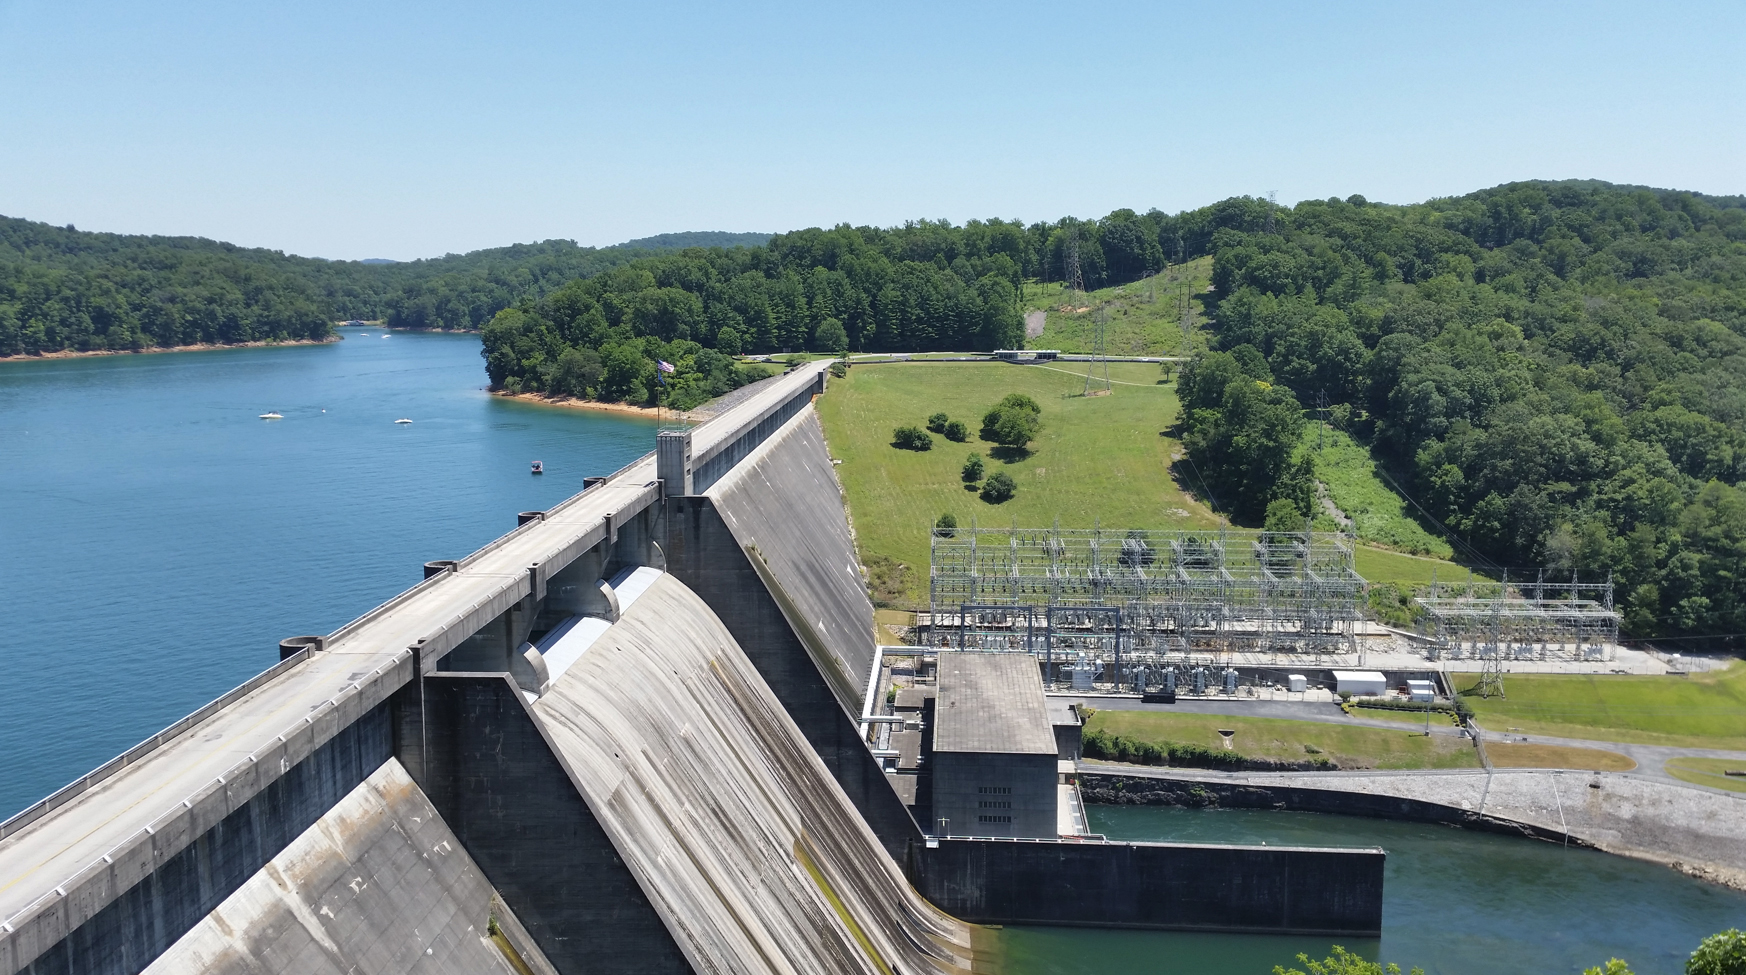 Owned and operated by the Tennessee Valley Authority, Norris Dam on the Clinch River in east Tennessee is a hydroelectric facility having a summer net dependable capacity of 126 MW (Image courtesy of ORNL, U.S. Department of Energy)